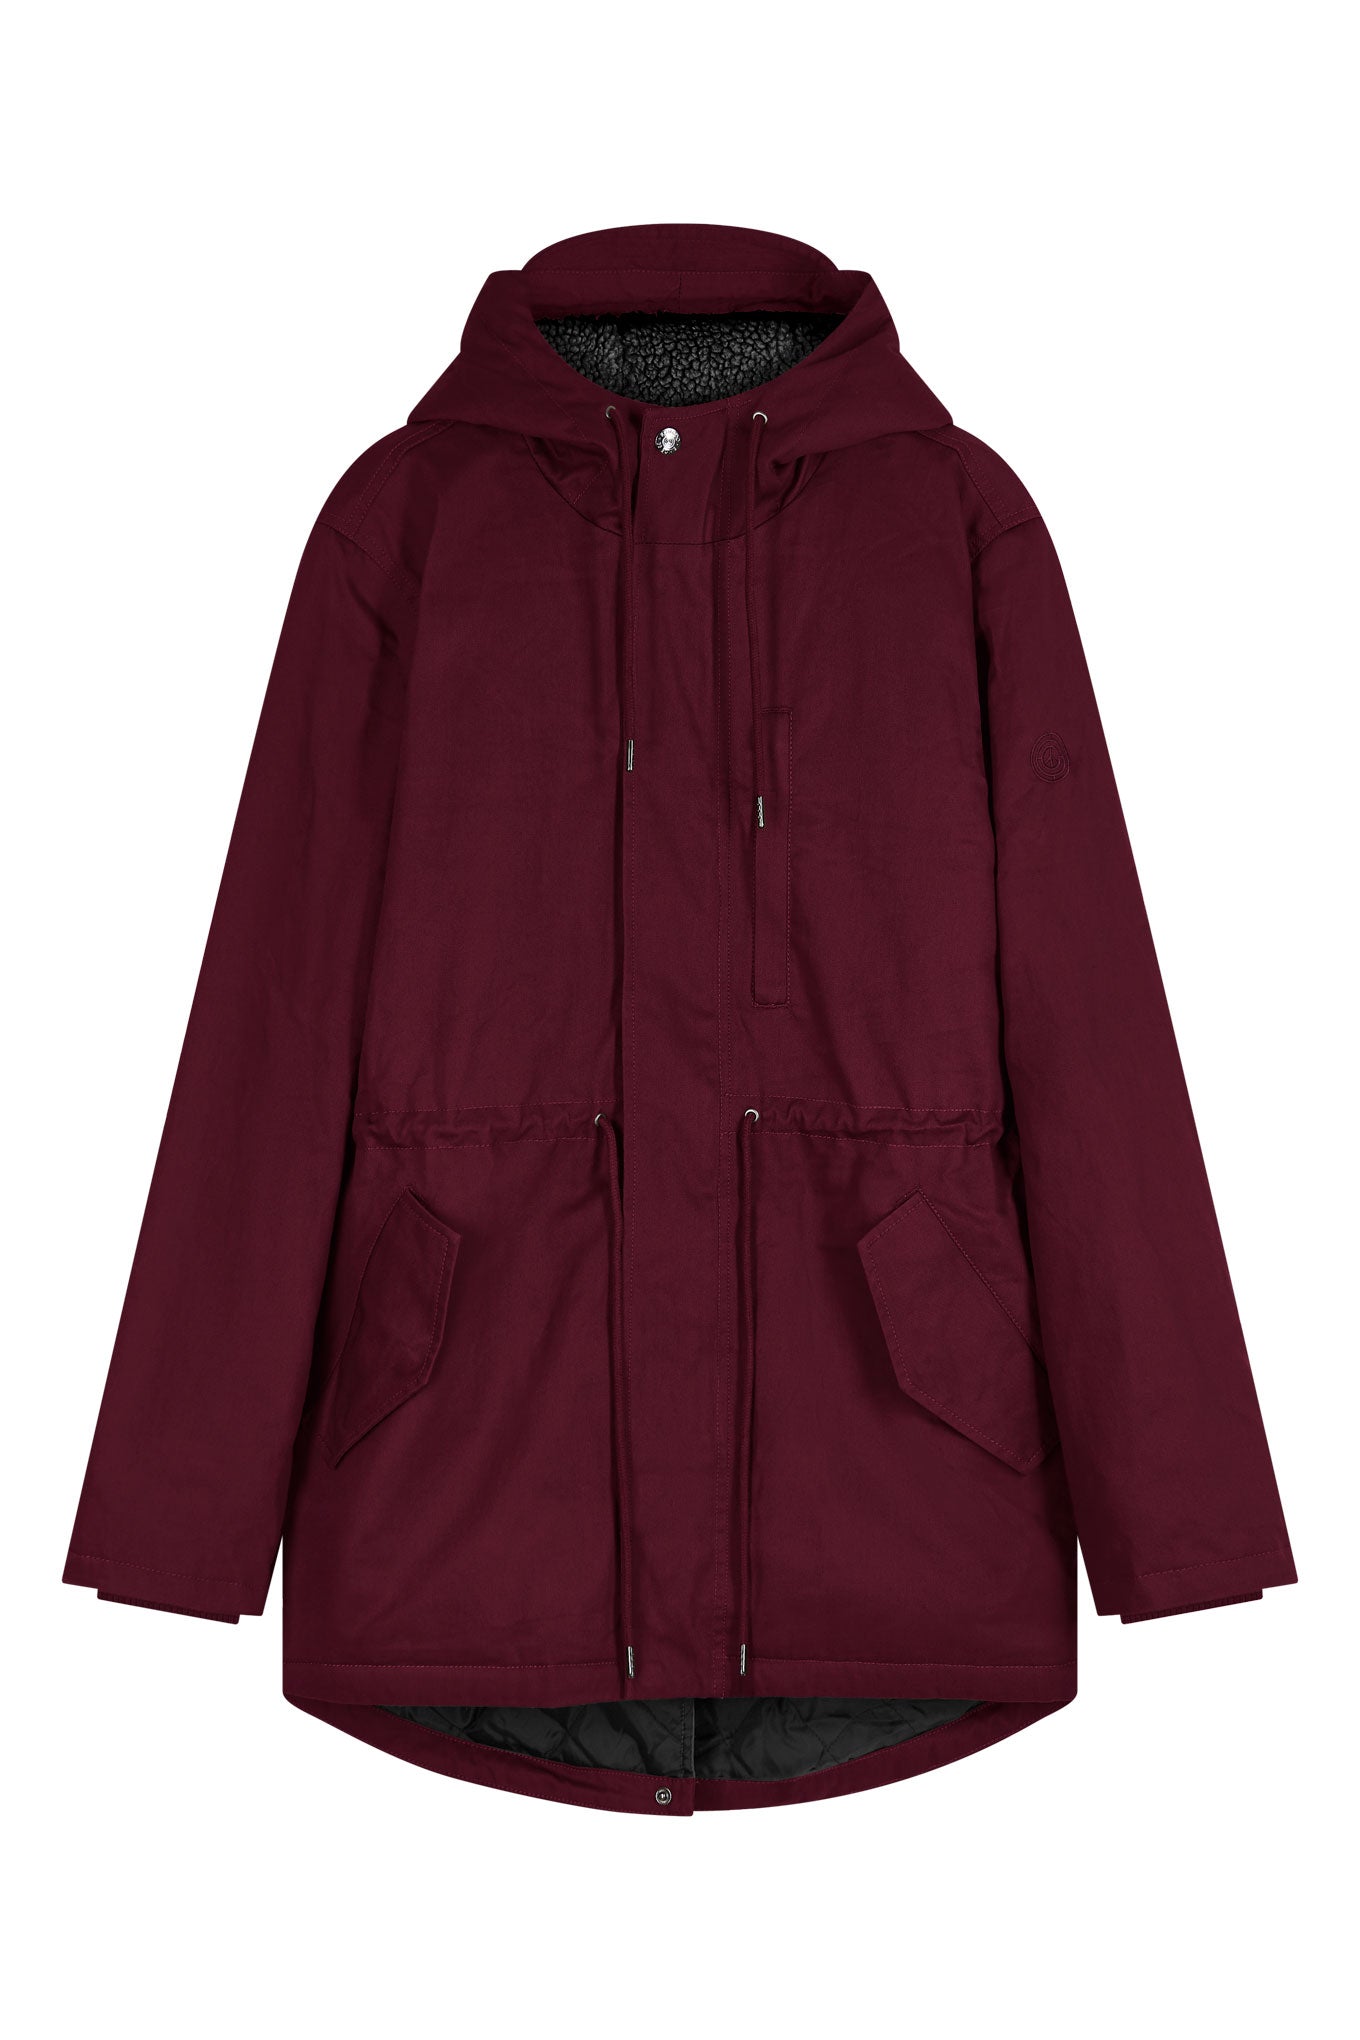 WILSON - Water Resistant Organic Cotton Parka Wine Red